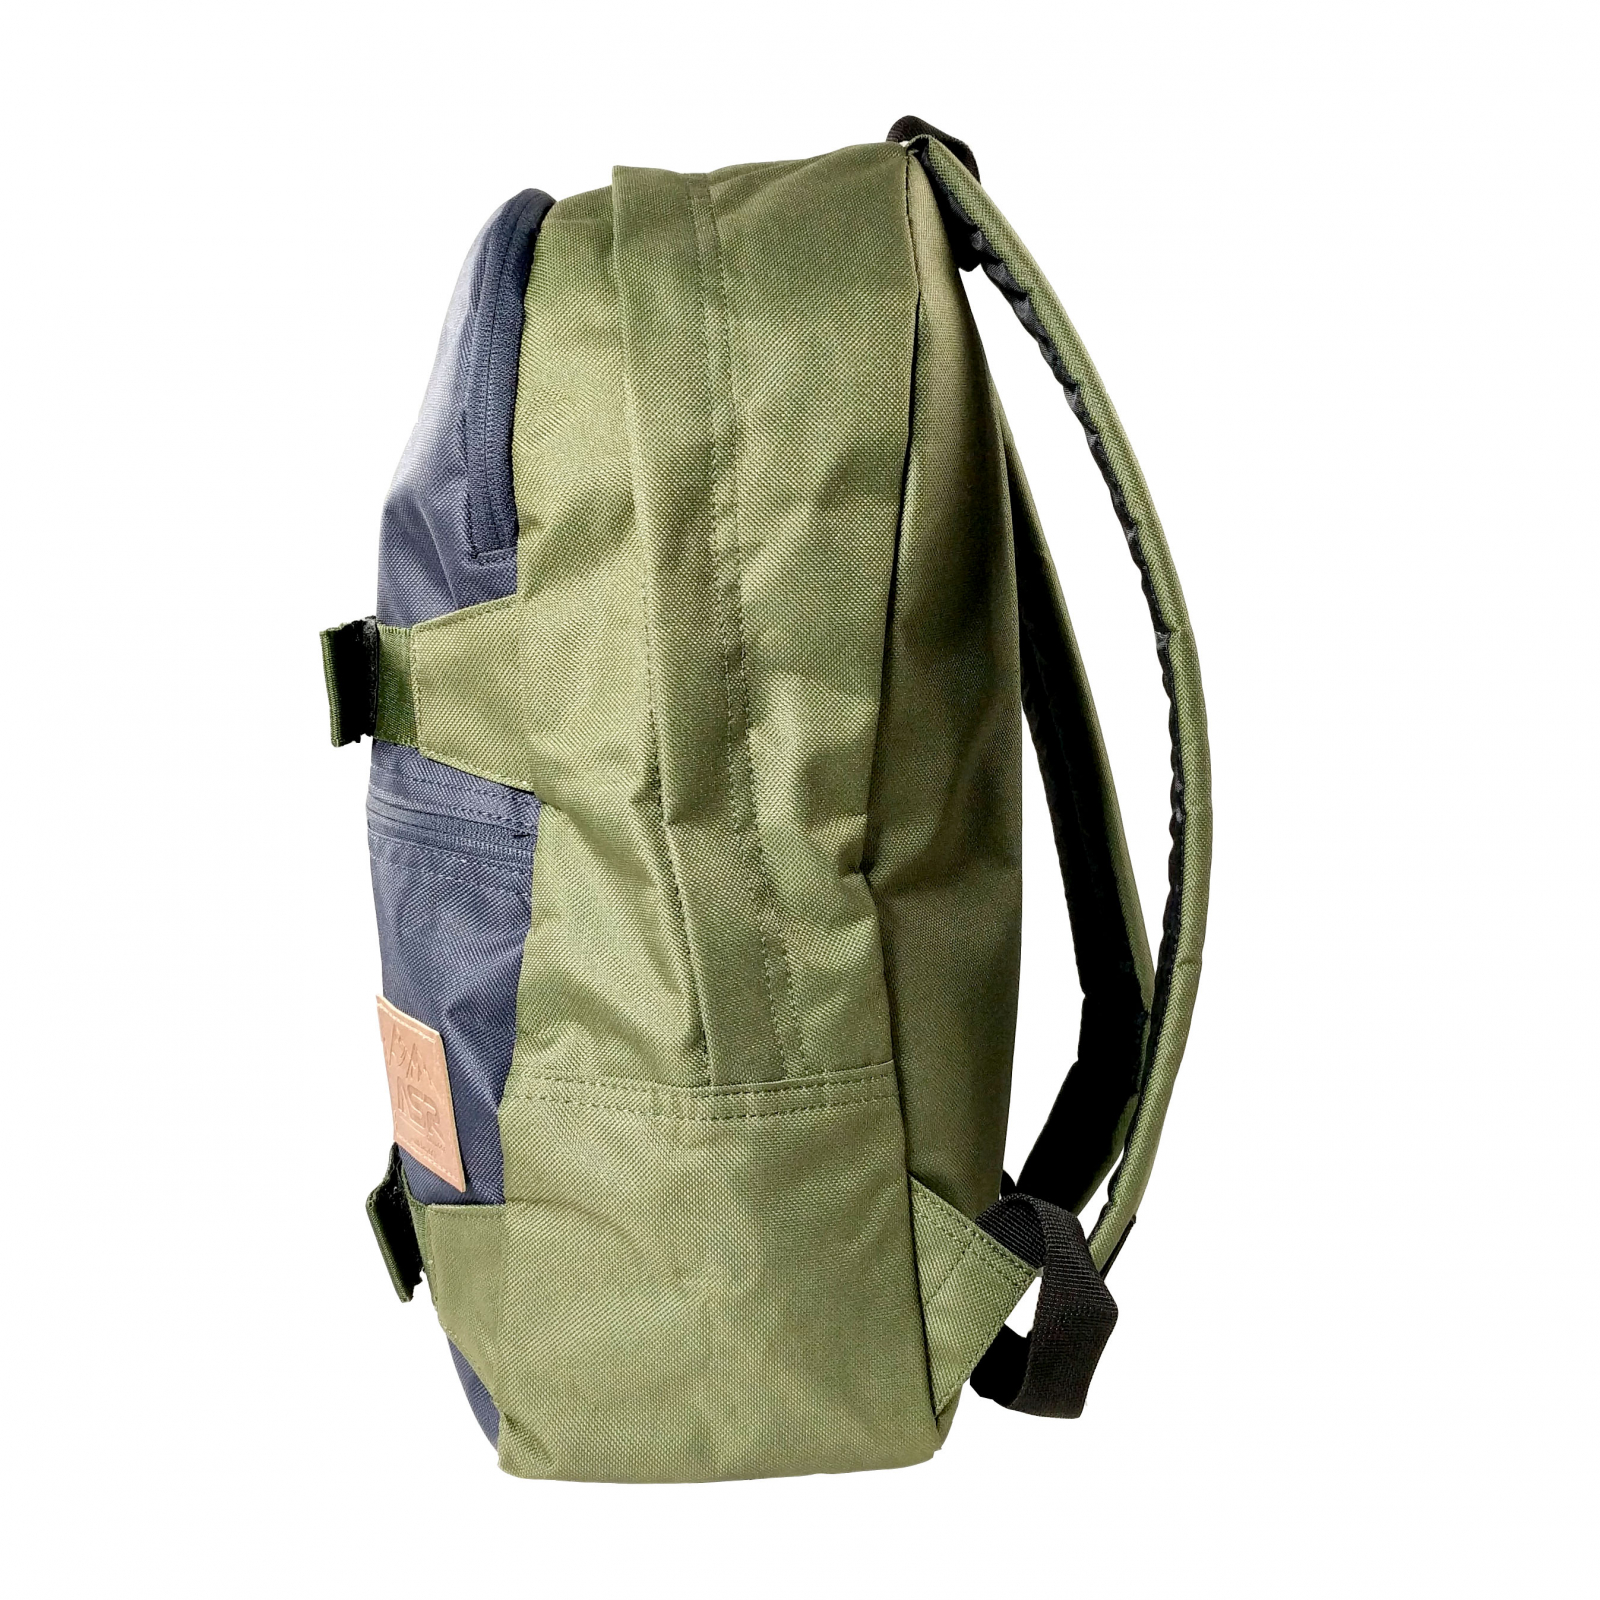 ASR Outdoor 19L Griptape Backpack Dual Zip Two Tone Navy OD Green - image 4 of 7